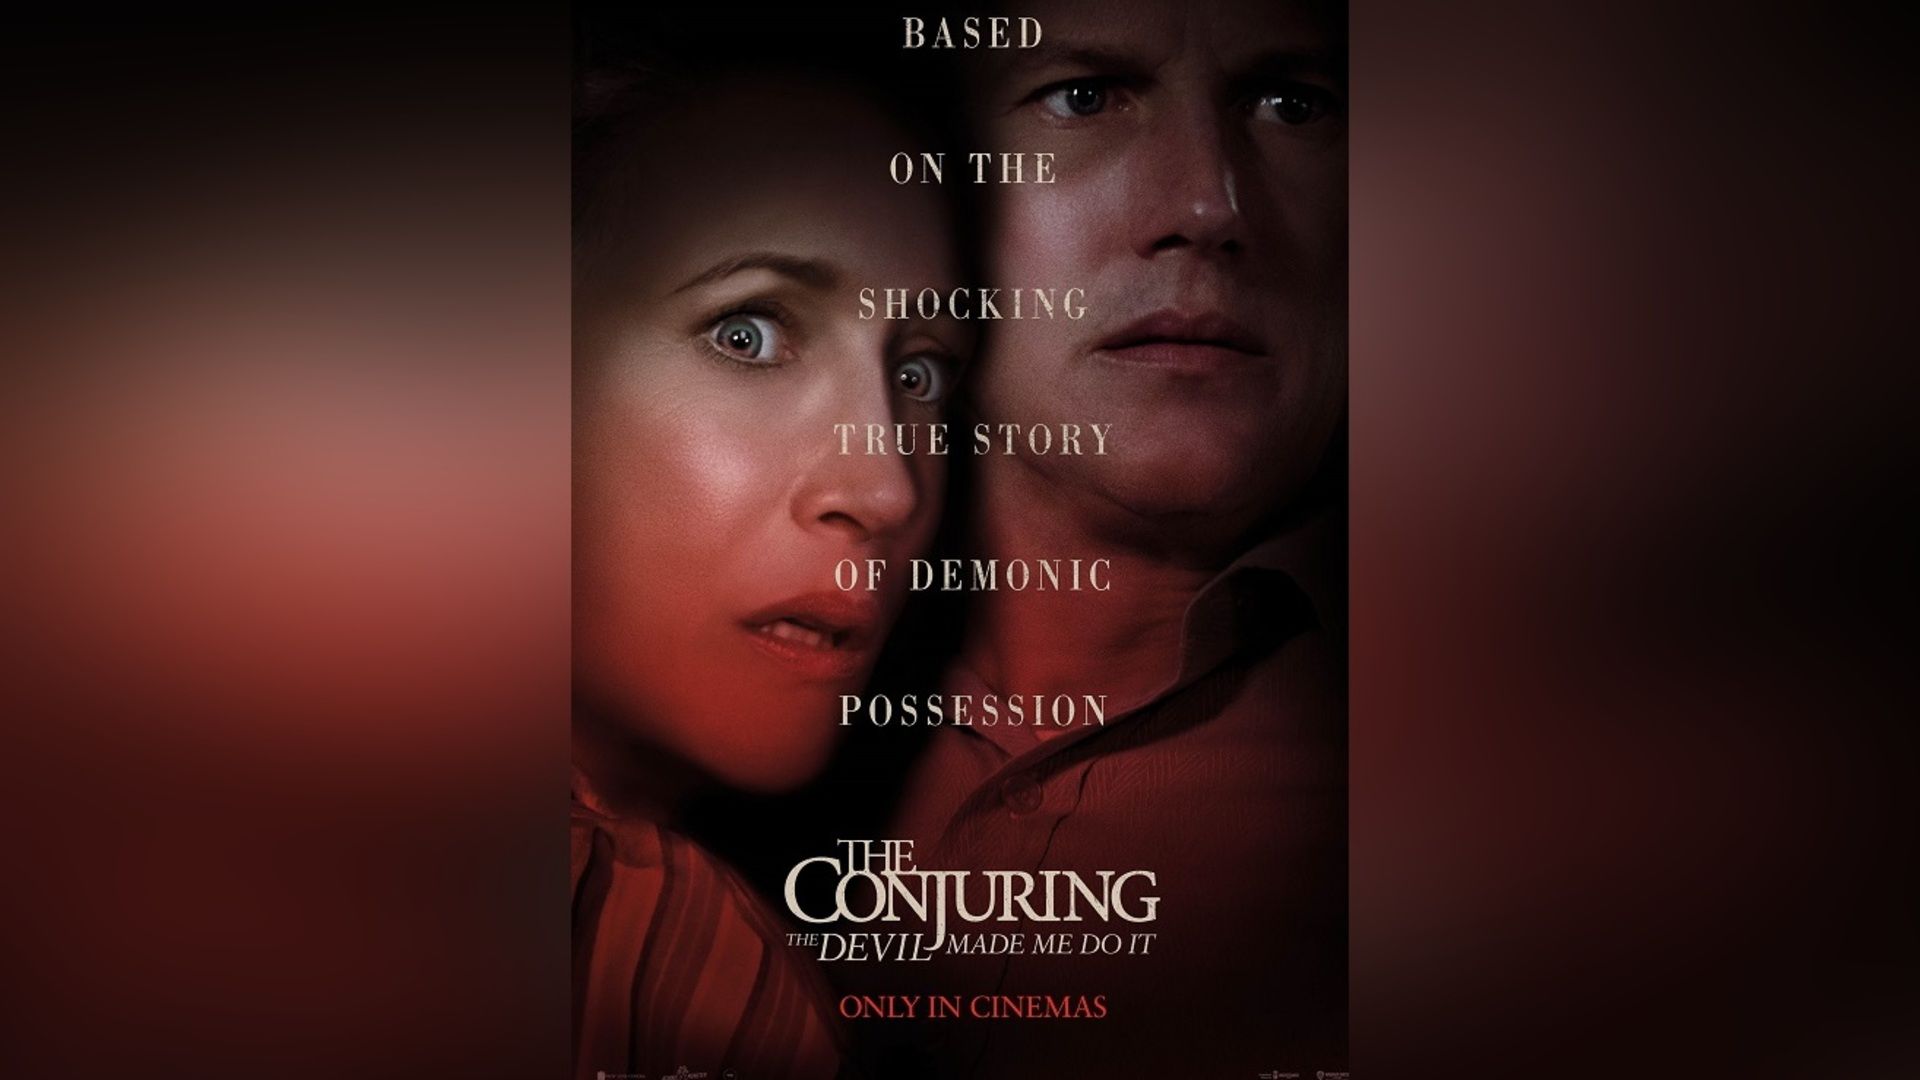 The Conjuring: The Devil Made Me Do It Review: The Third Film May be a Little Weak, But it's Better Than Some Other Conjuring Universe Films